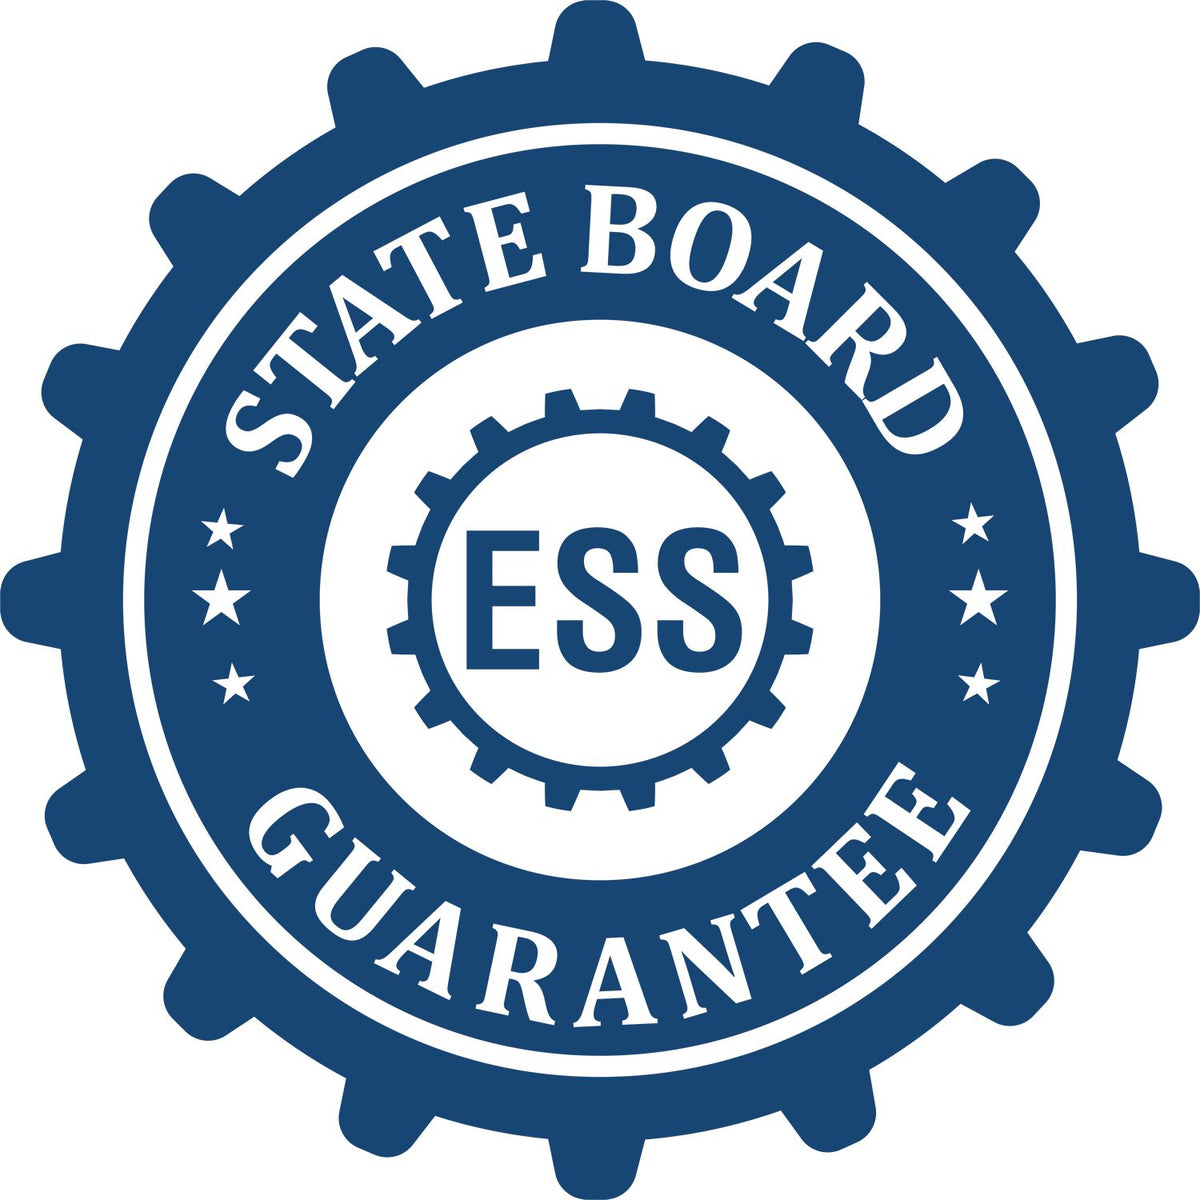 An emblem in a gear shape illustrating a state board guarantee for the Kansas Engineer Desk Seal product.